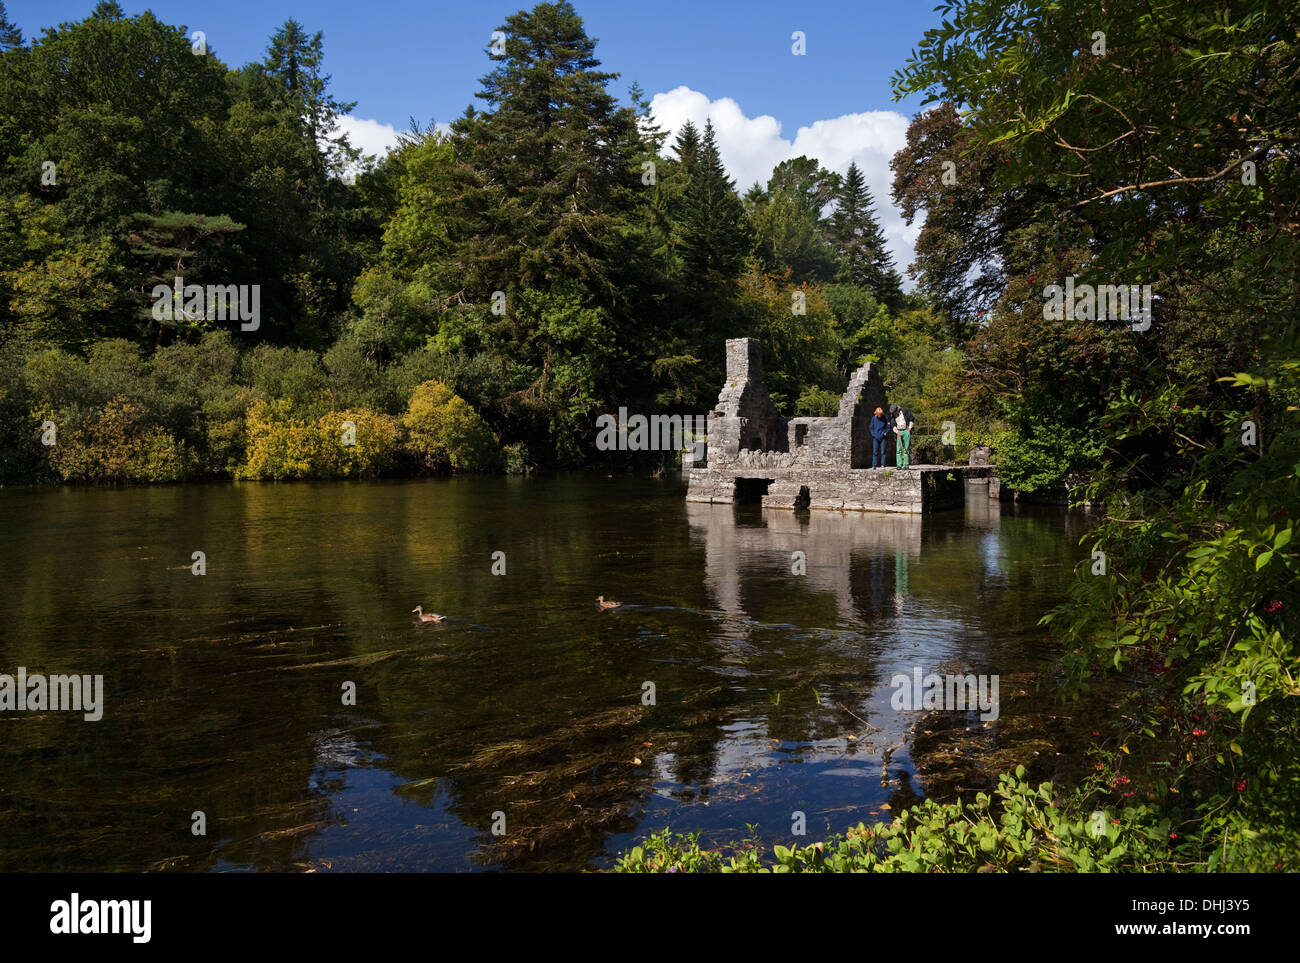 The 12th Century Monk's Fishing House on the Cong River, part of Cong Abbey, Cong, County Mayo, Ireland Stock Photo